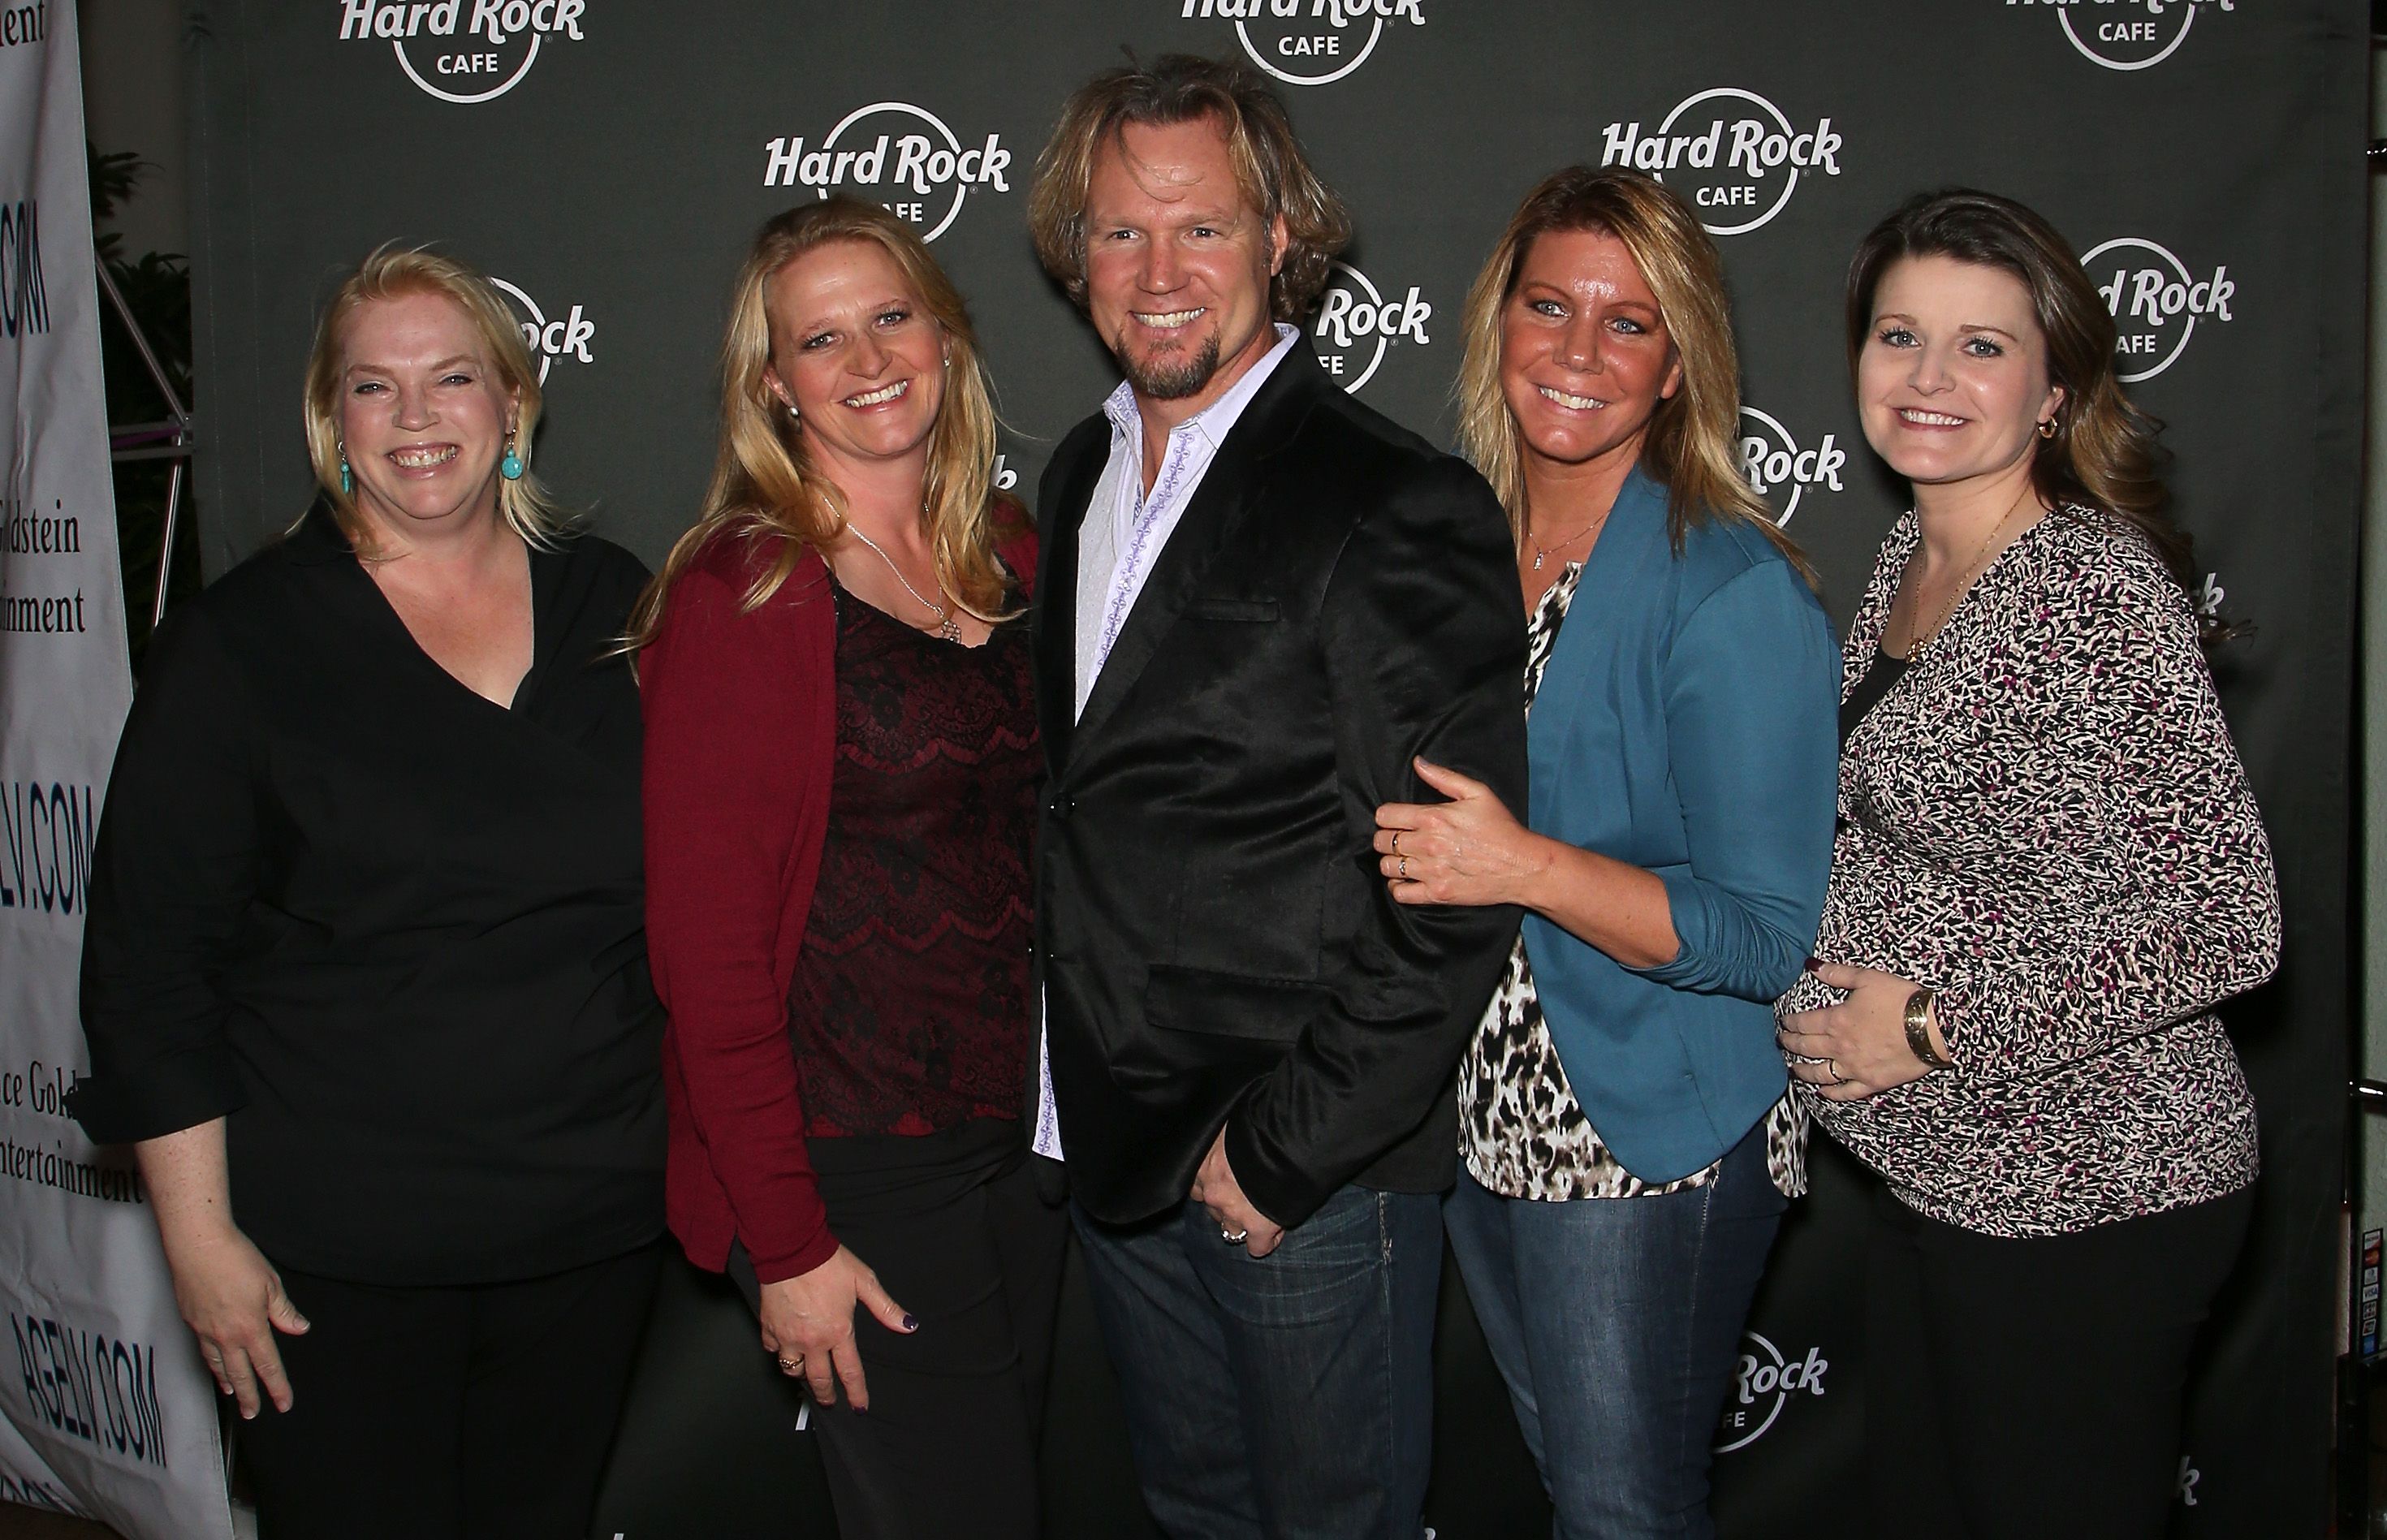 Kody Brown and his wives at Hard Rock Cafe Las Vegas for the Hotel's 25th anniversary celebration on October 10, 2015. | Source: Getty Images